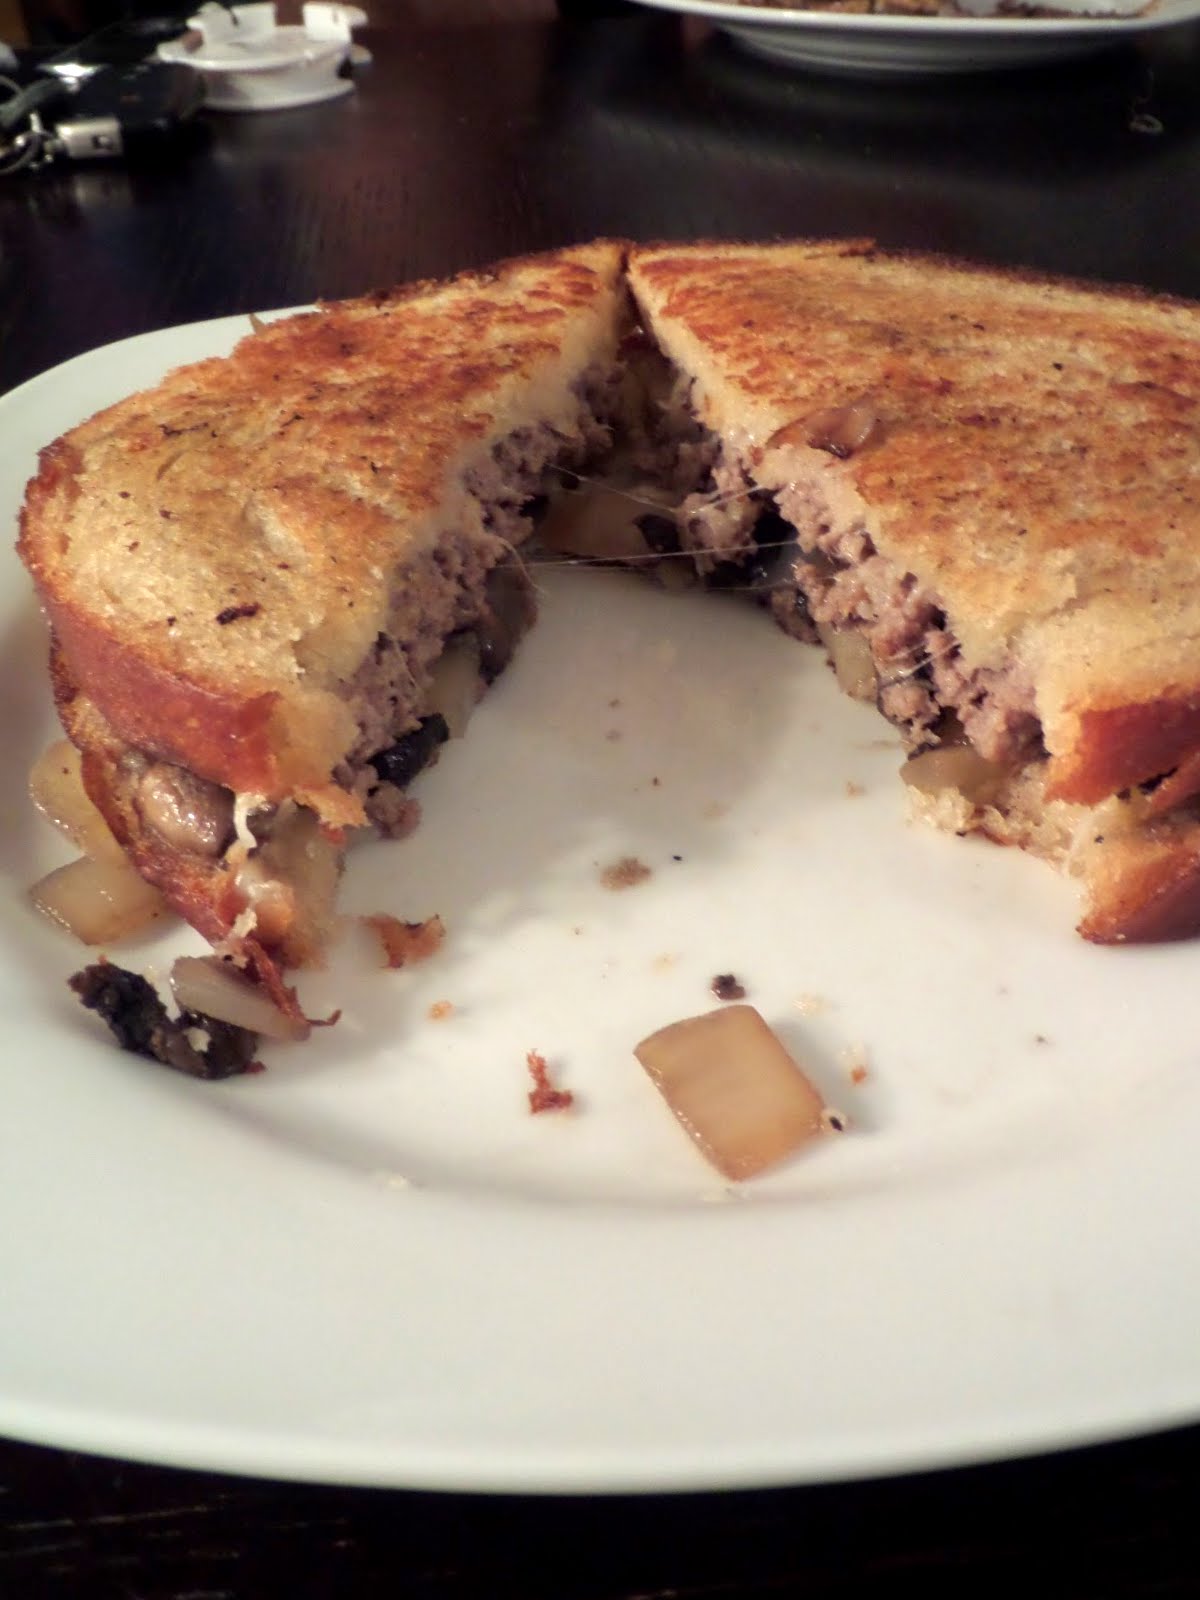 Mushroom and Swiss Patty Melt:  A burger patty, Swiss cheese, and sauteed mushrooms and onions, sandwiched between 2 slices of bread then grilled until hot and melty.